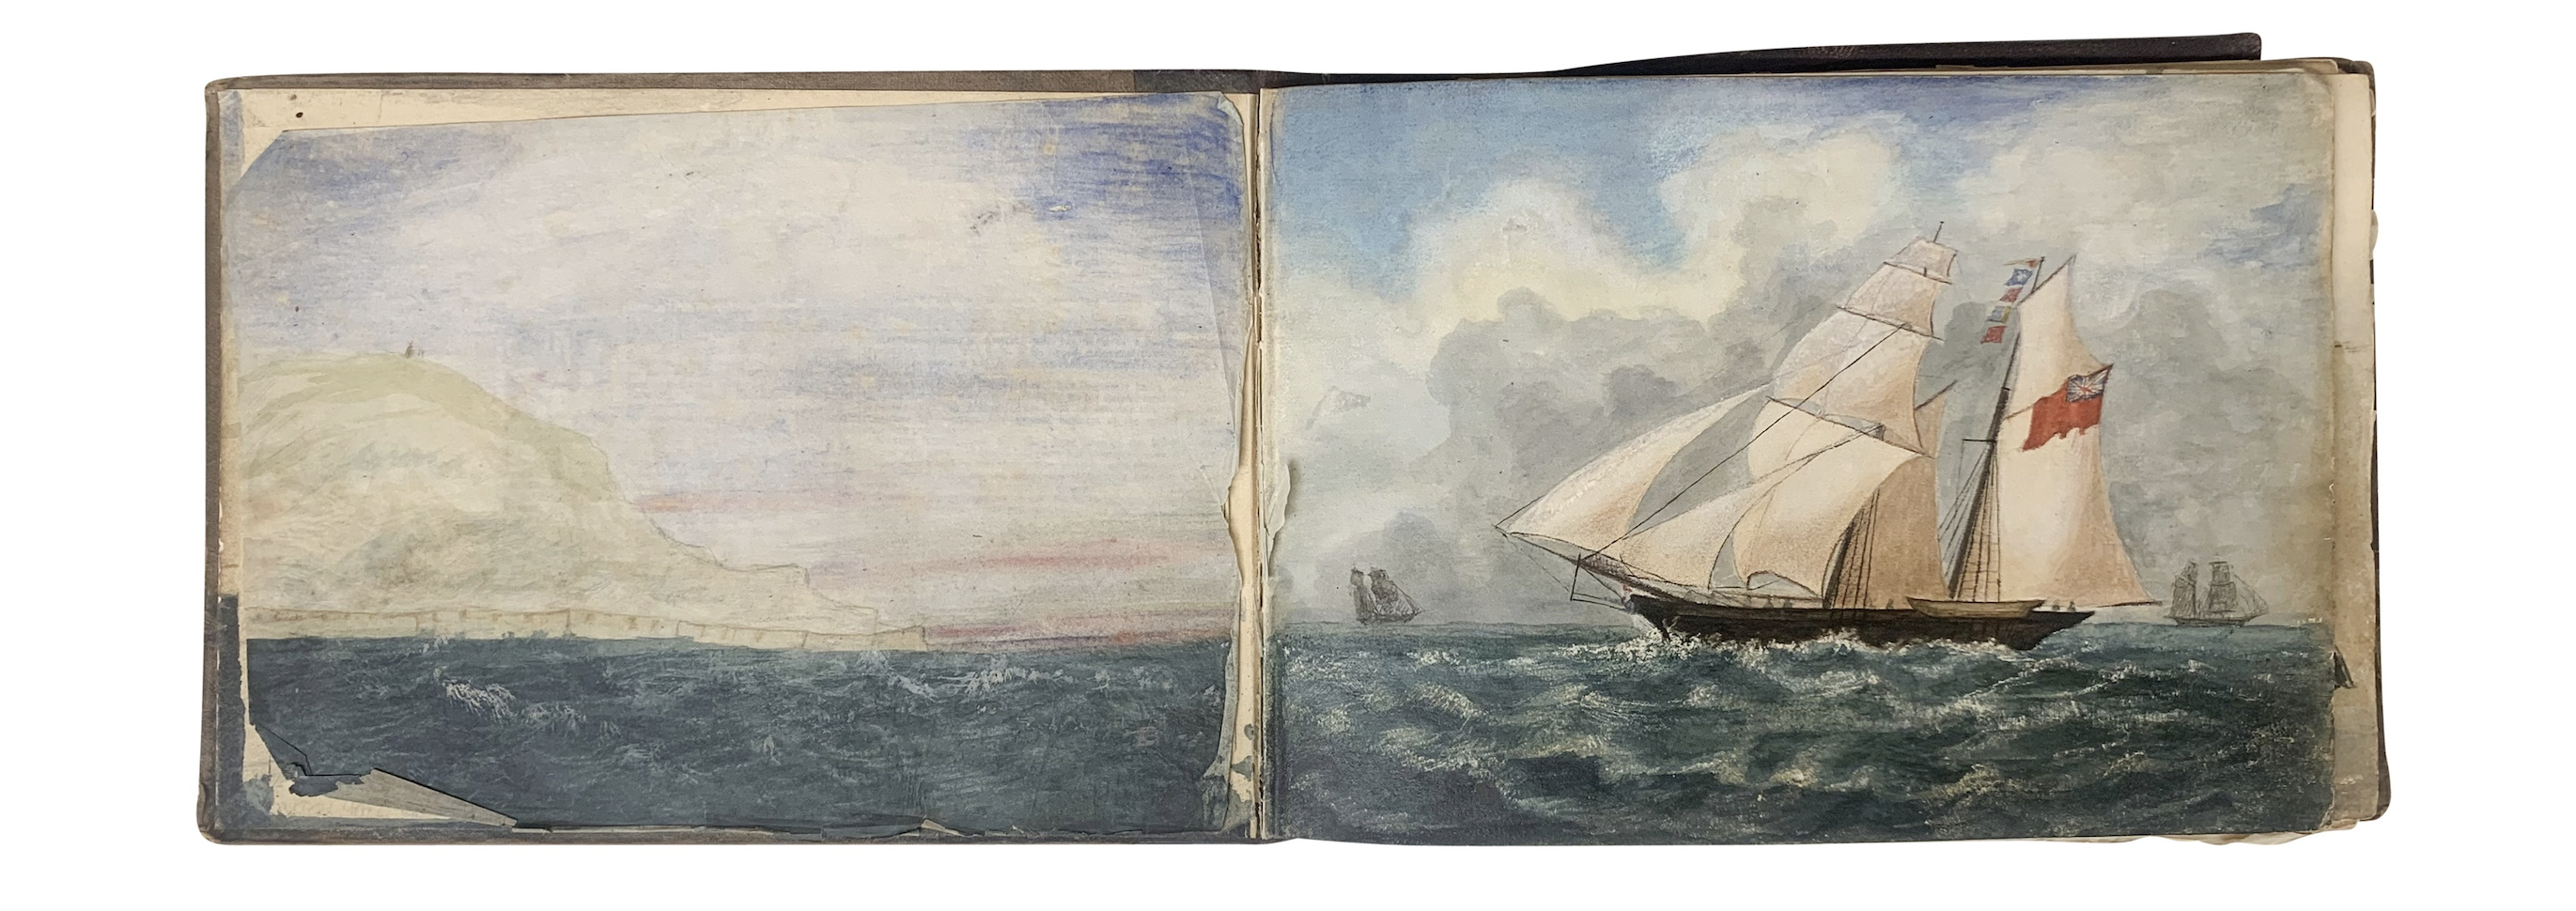 Colored drawing from Joseph Goldsborough Bruff’s sketchbook dating to his trip to California from 1849-1851, peak Gold Rush years, $25,000